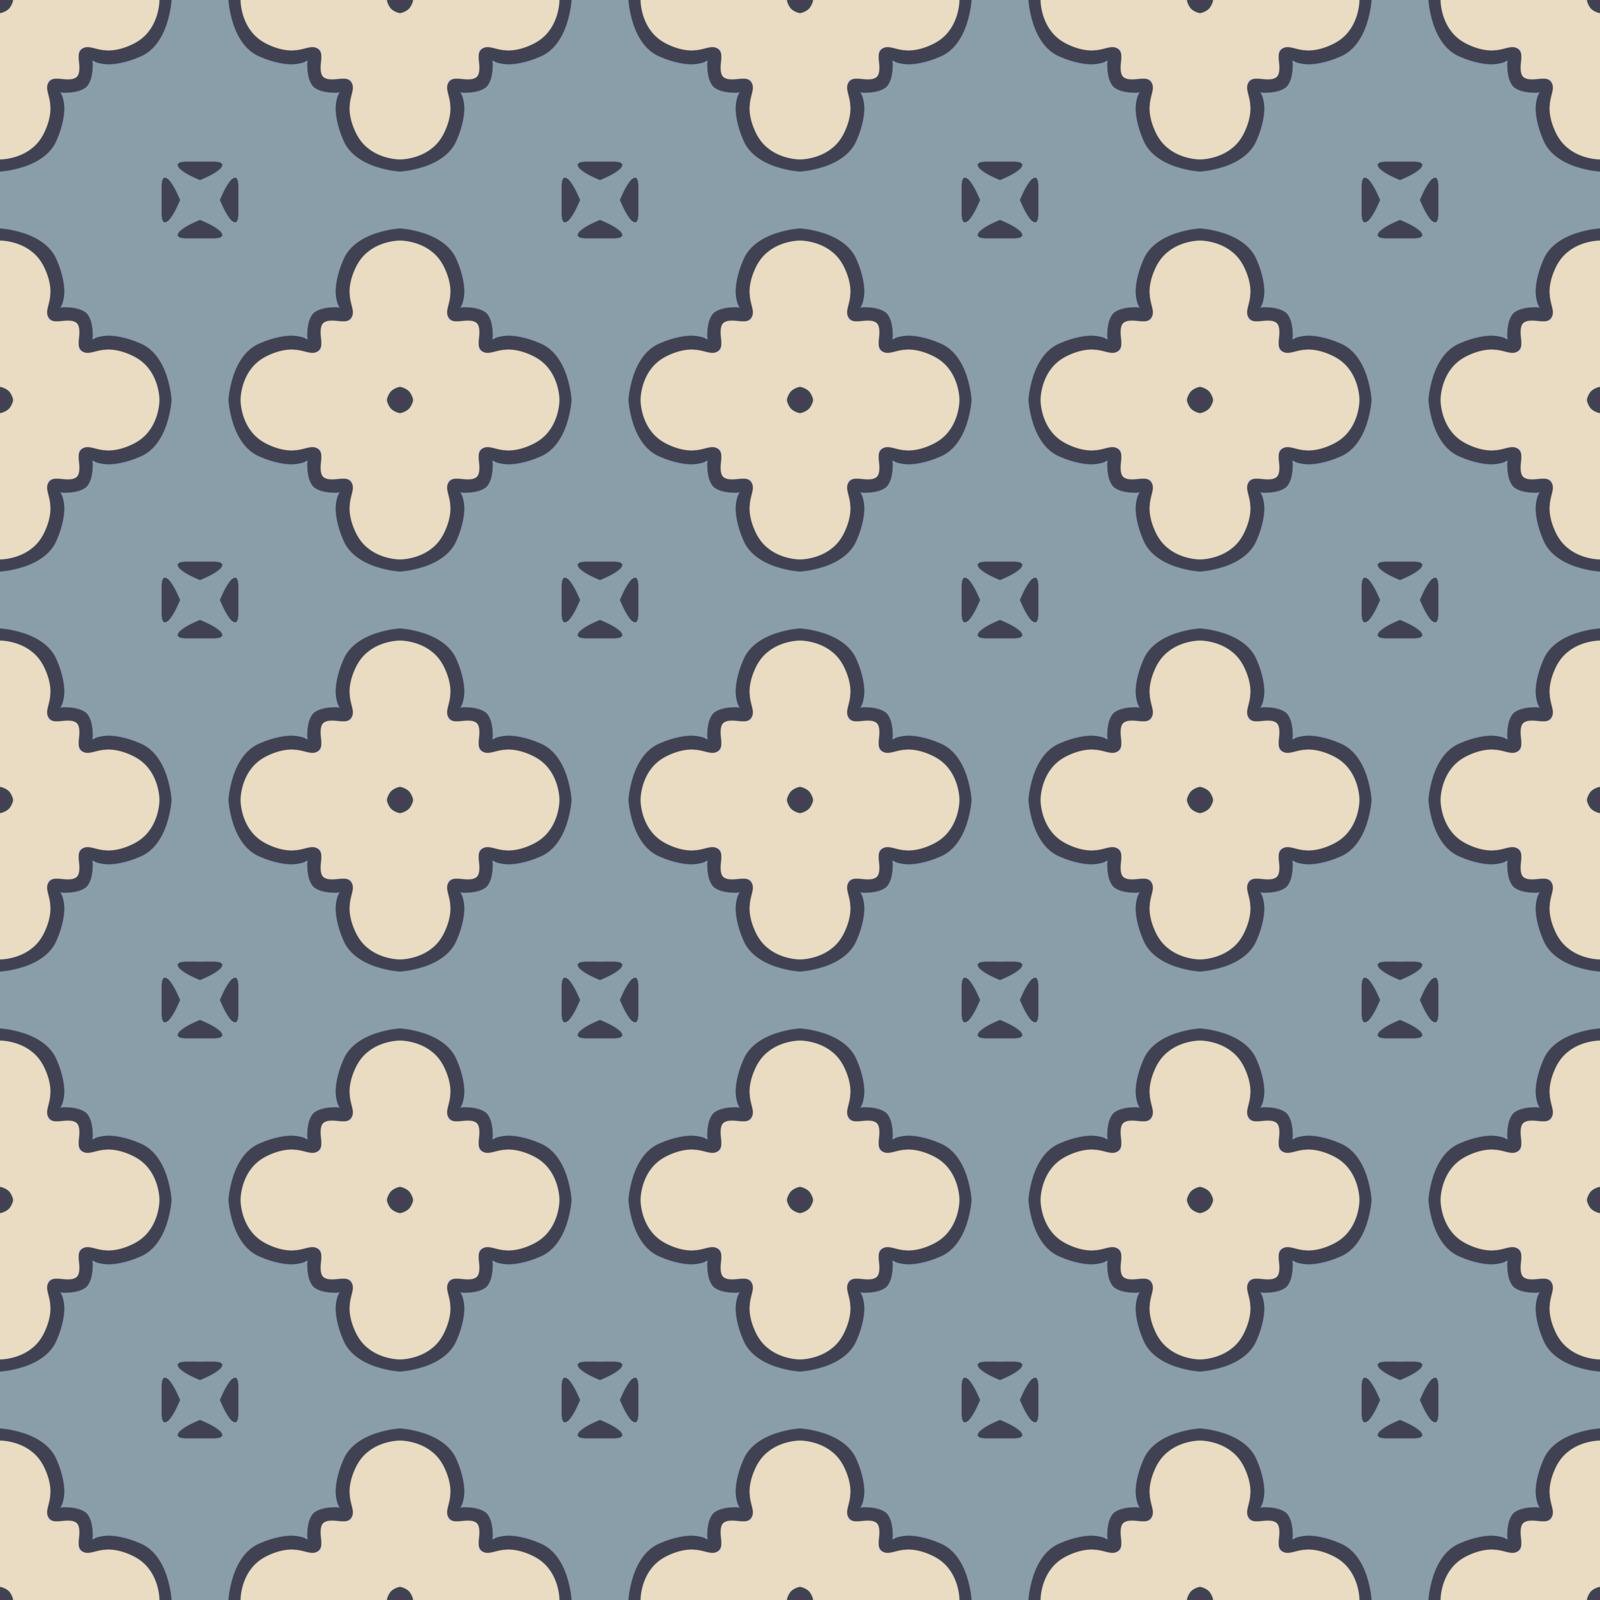 Seamless illustrated pattern made of abstract elements in beige and shades of blue